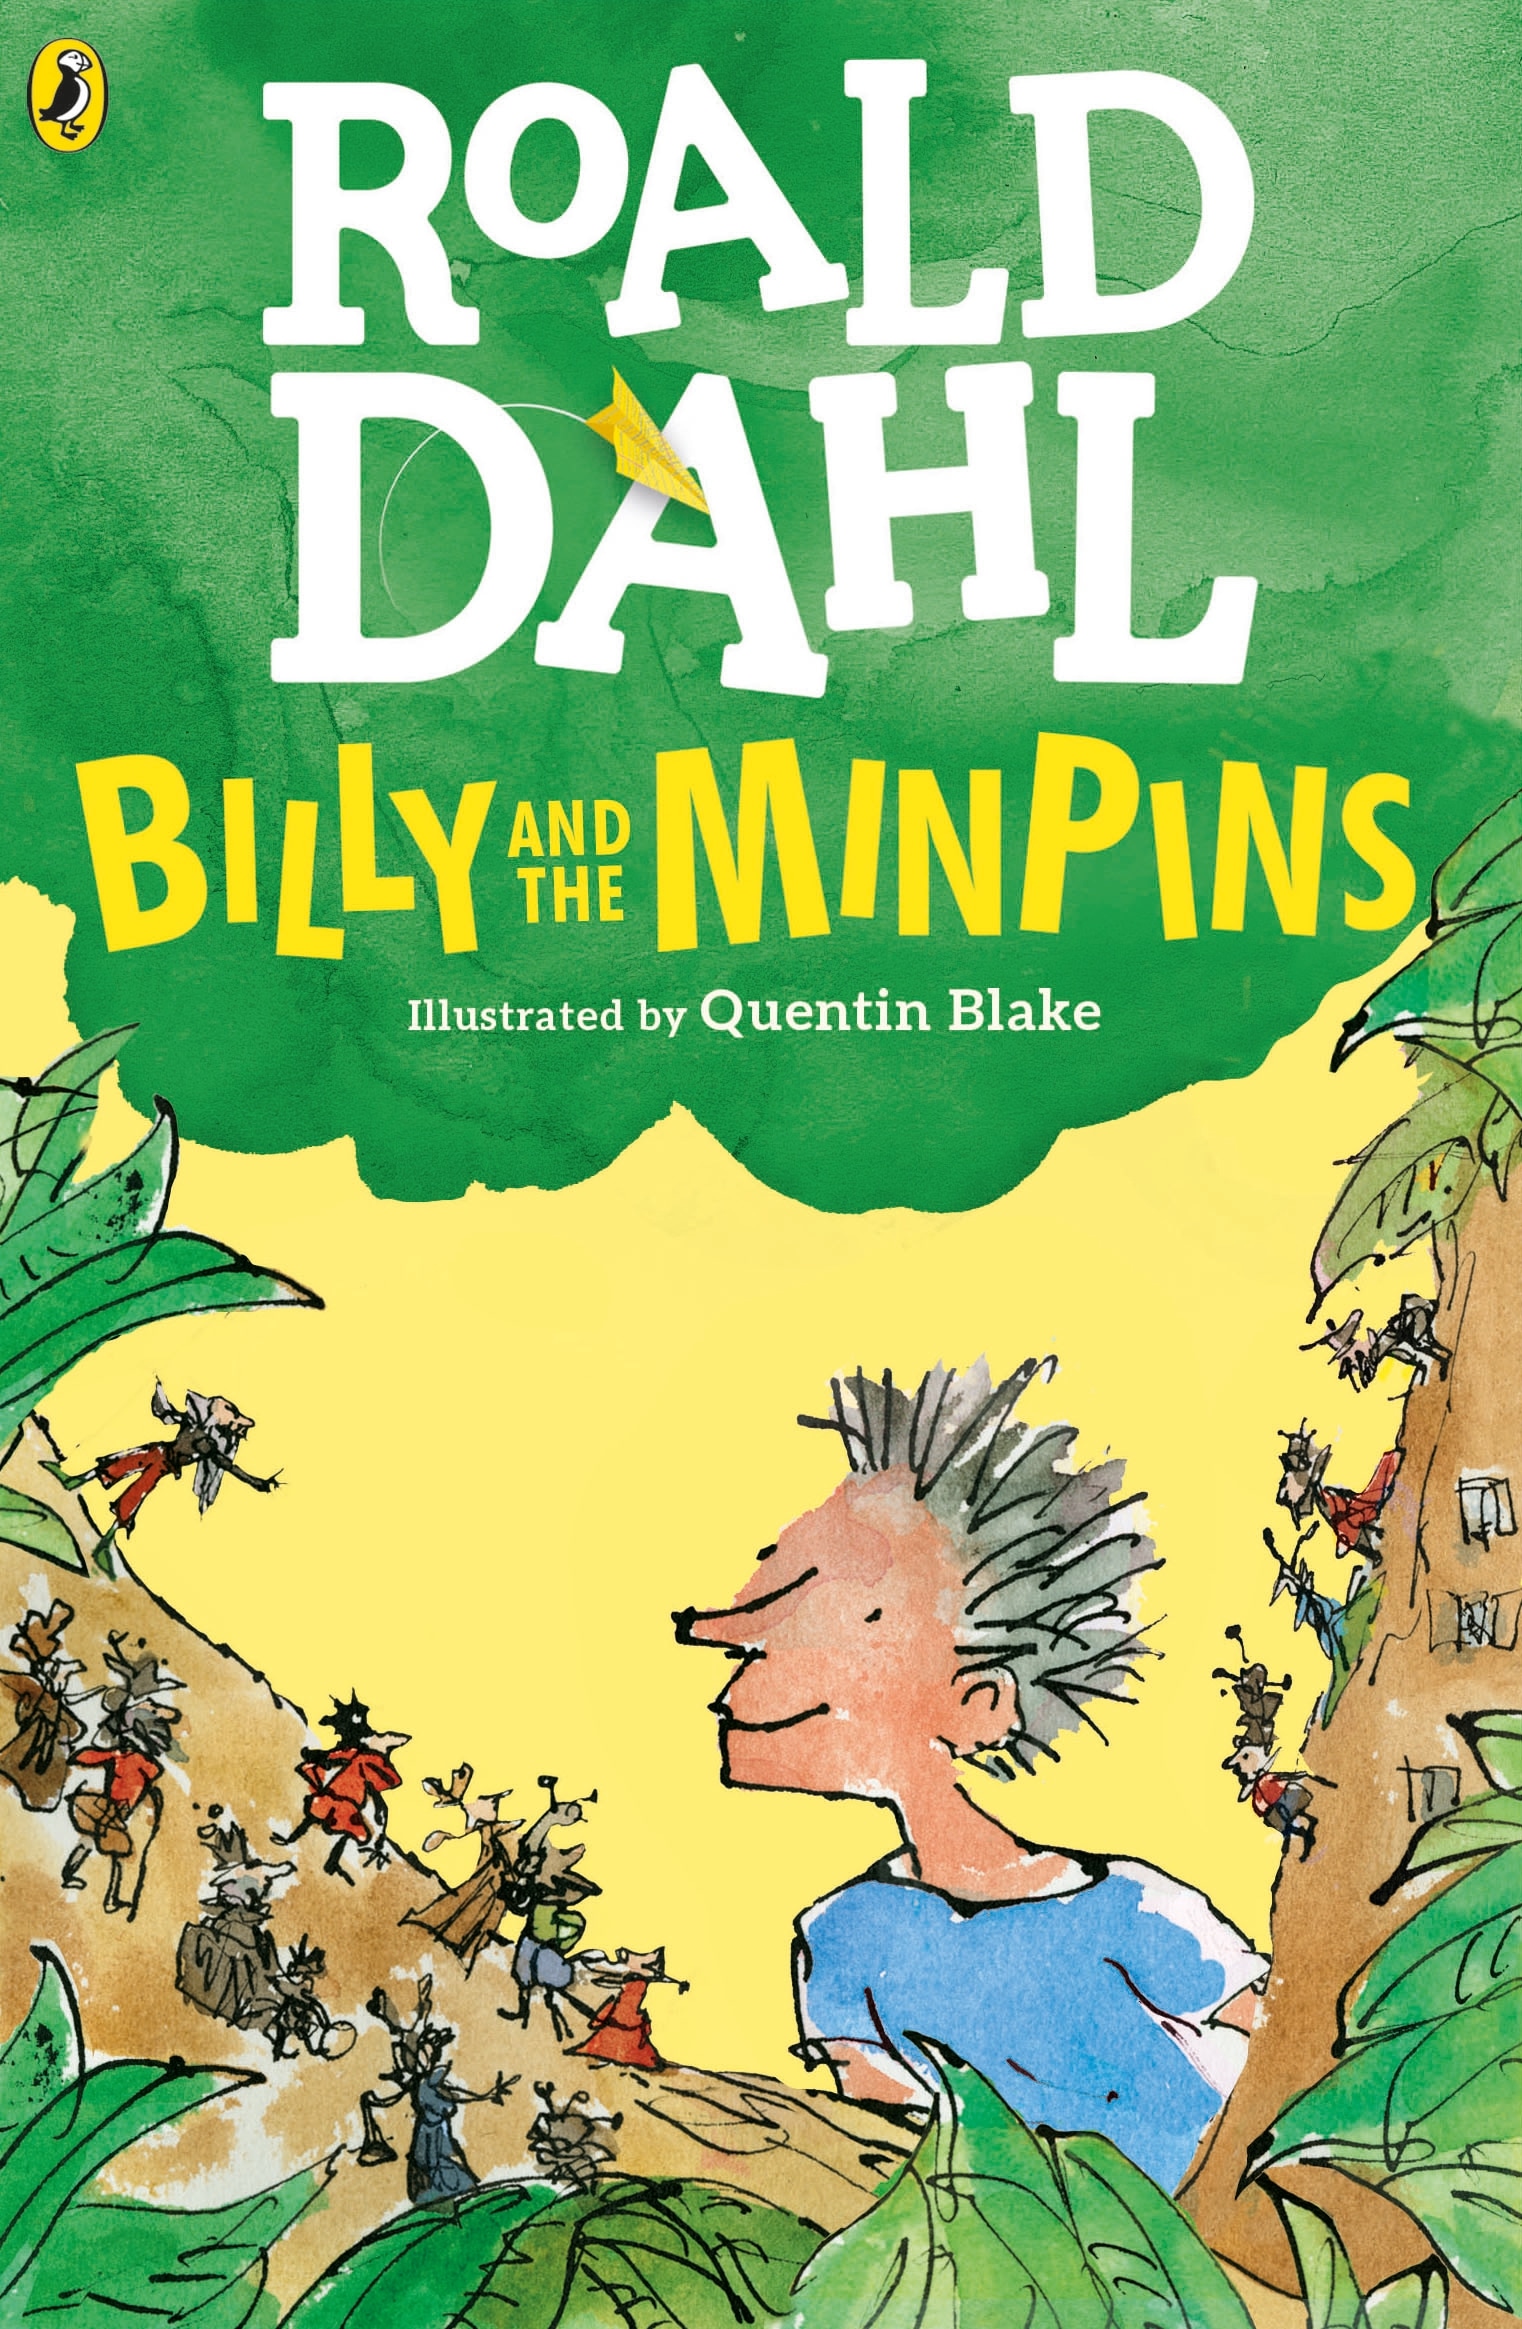 Book “Billy and the Minpins (illustrated by Quentin Blake)” by Roald Dahl — September 6, 2018